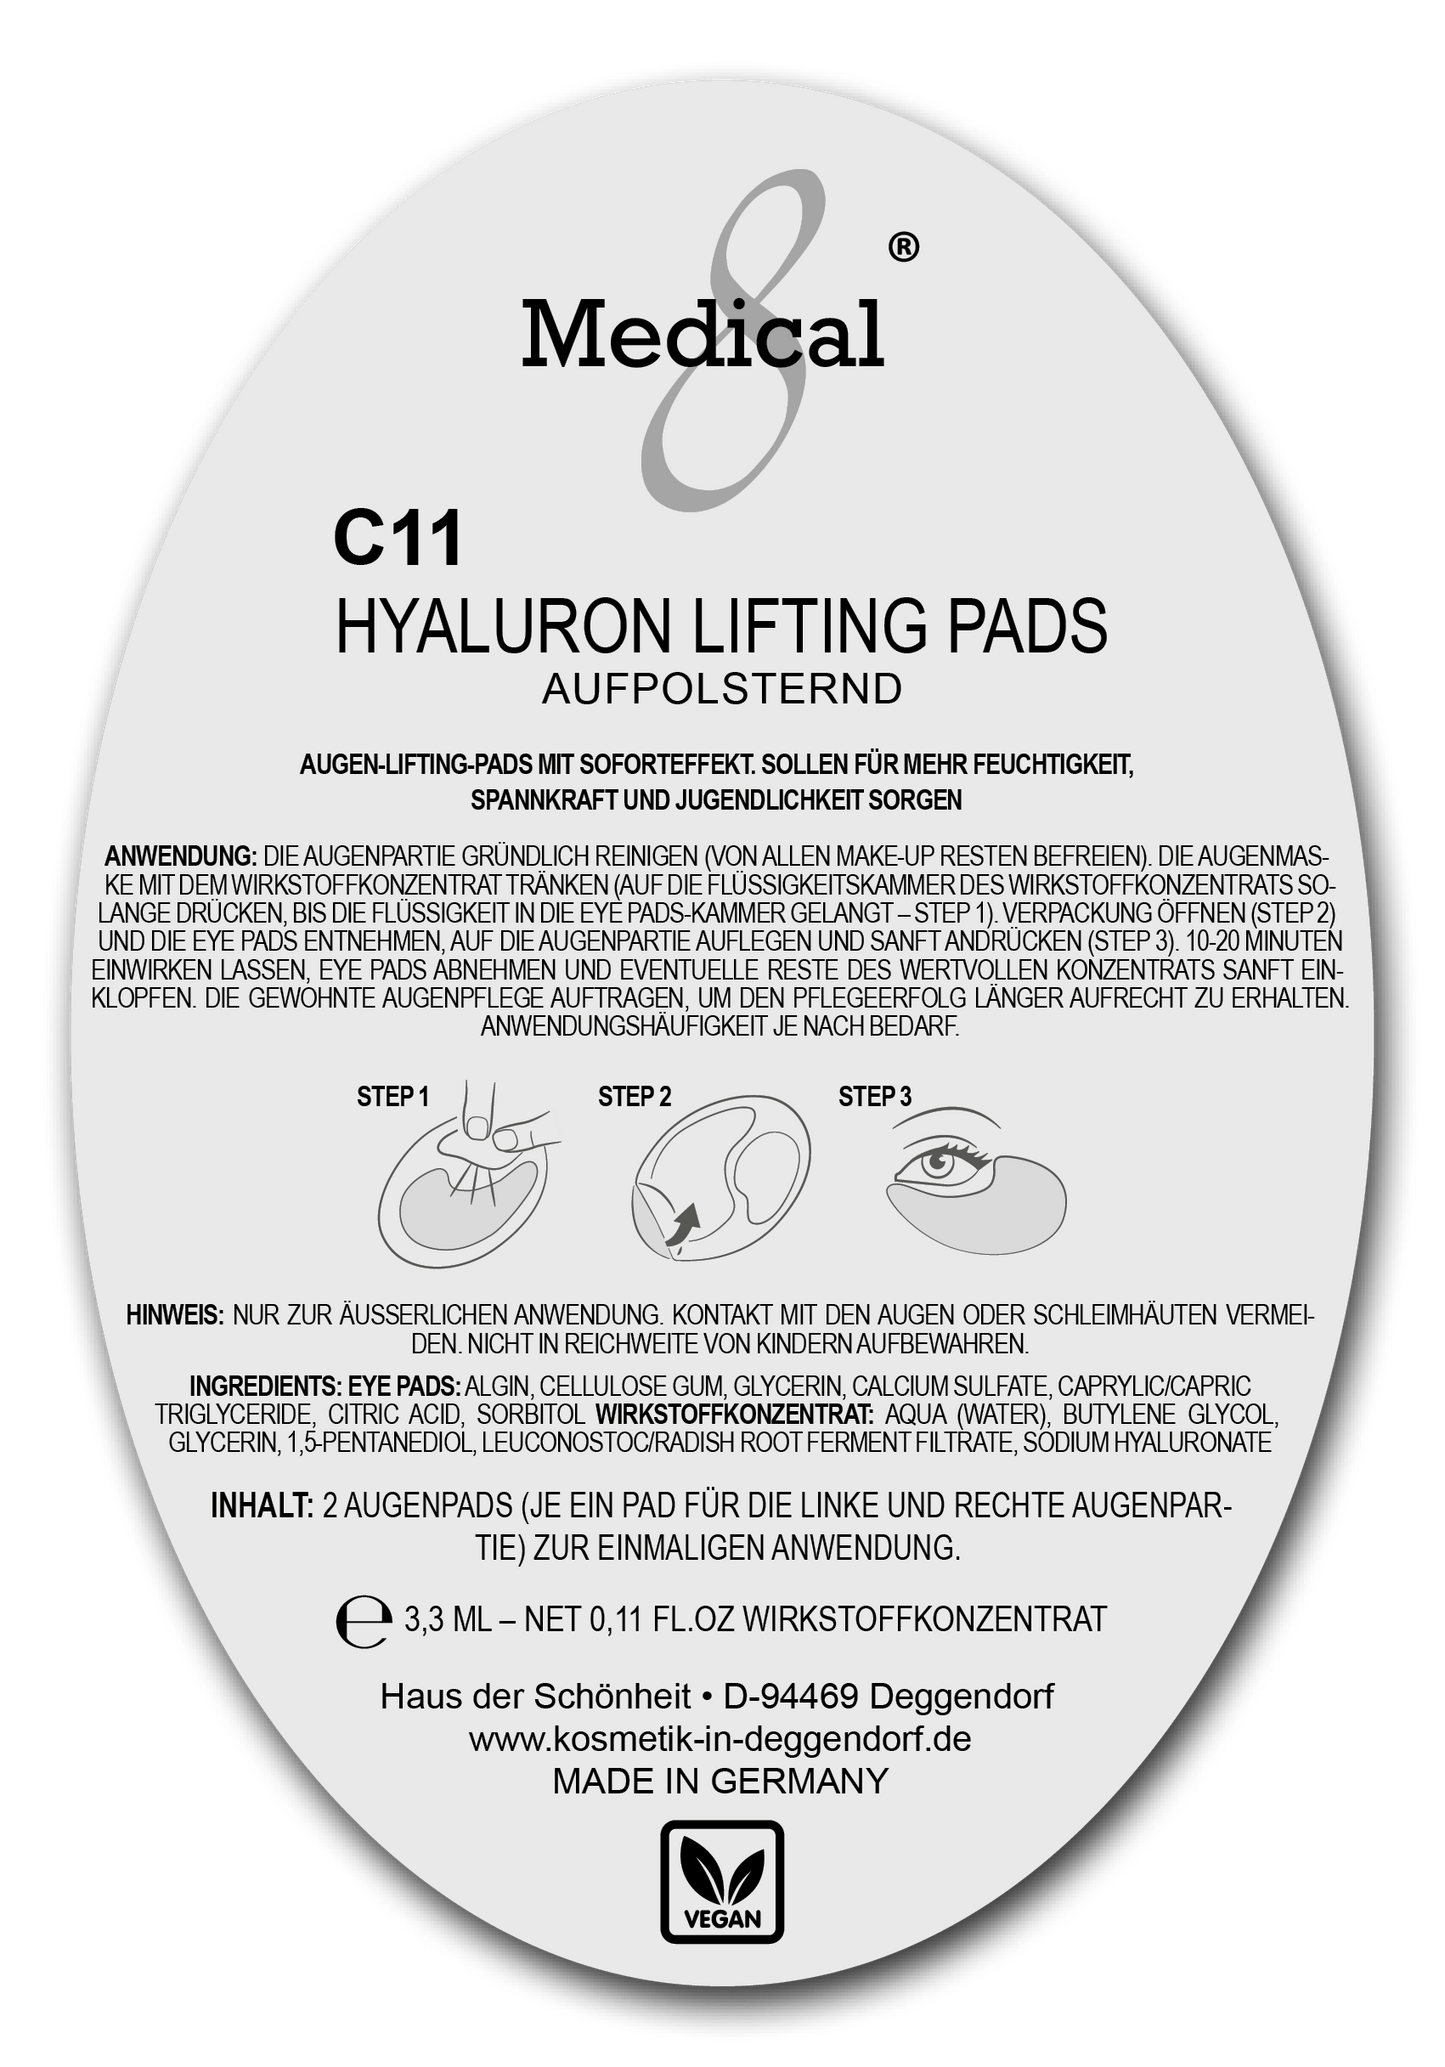 C11 Hyaluron Lifting Pads